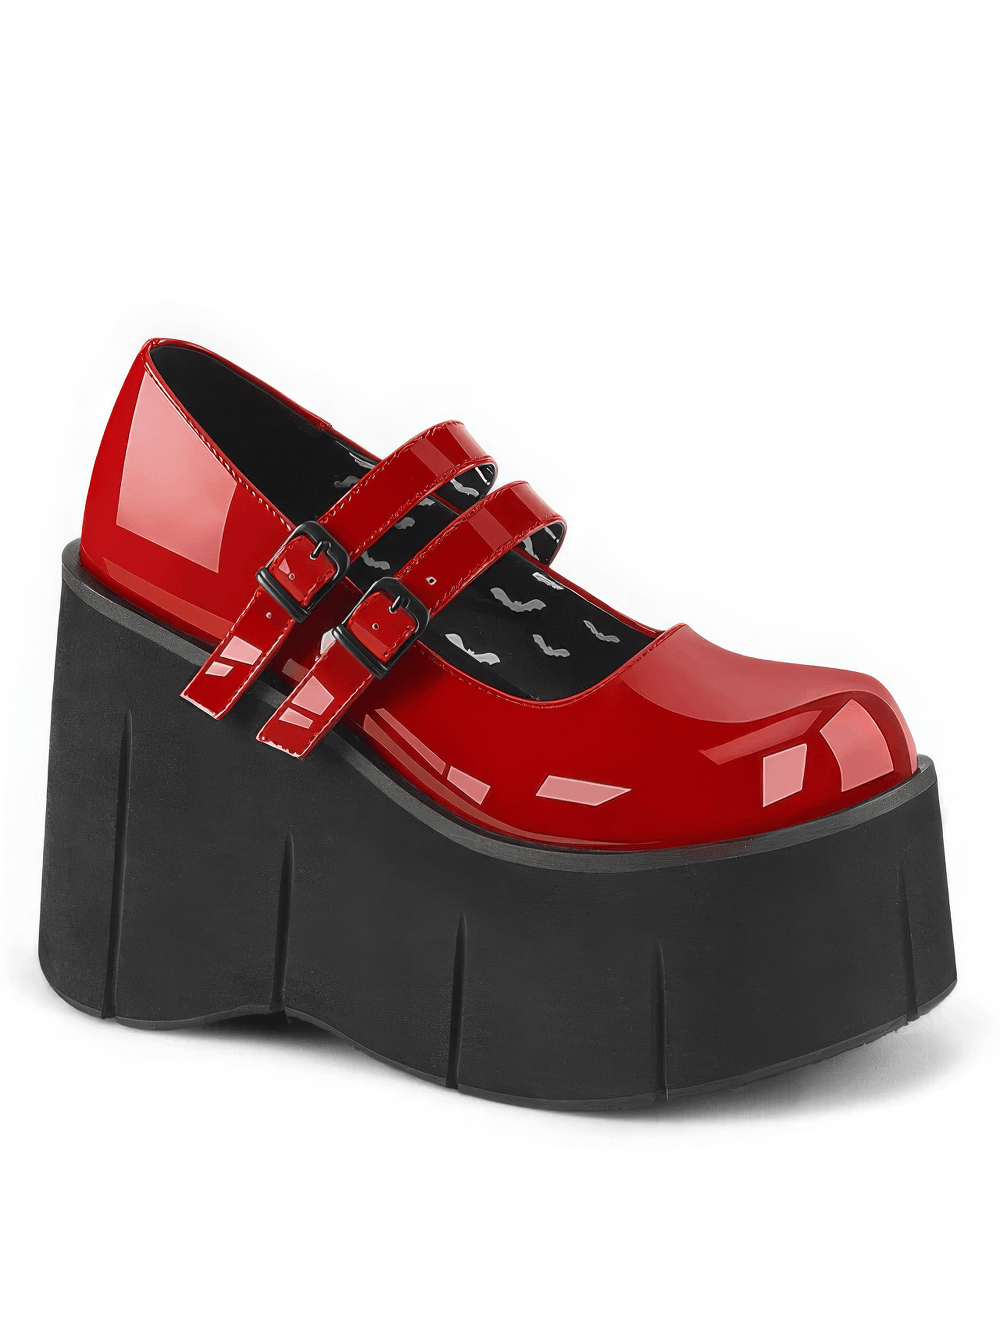 DEMONIA Edgy Red Double-Strap Platform Mary Janes